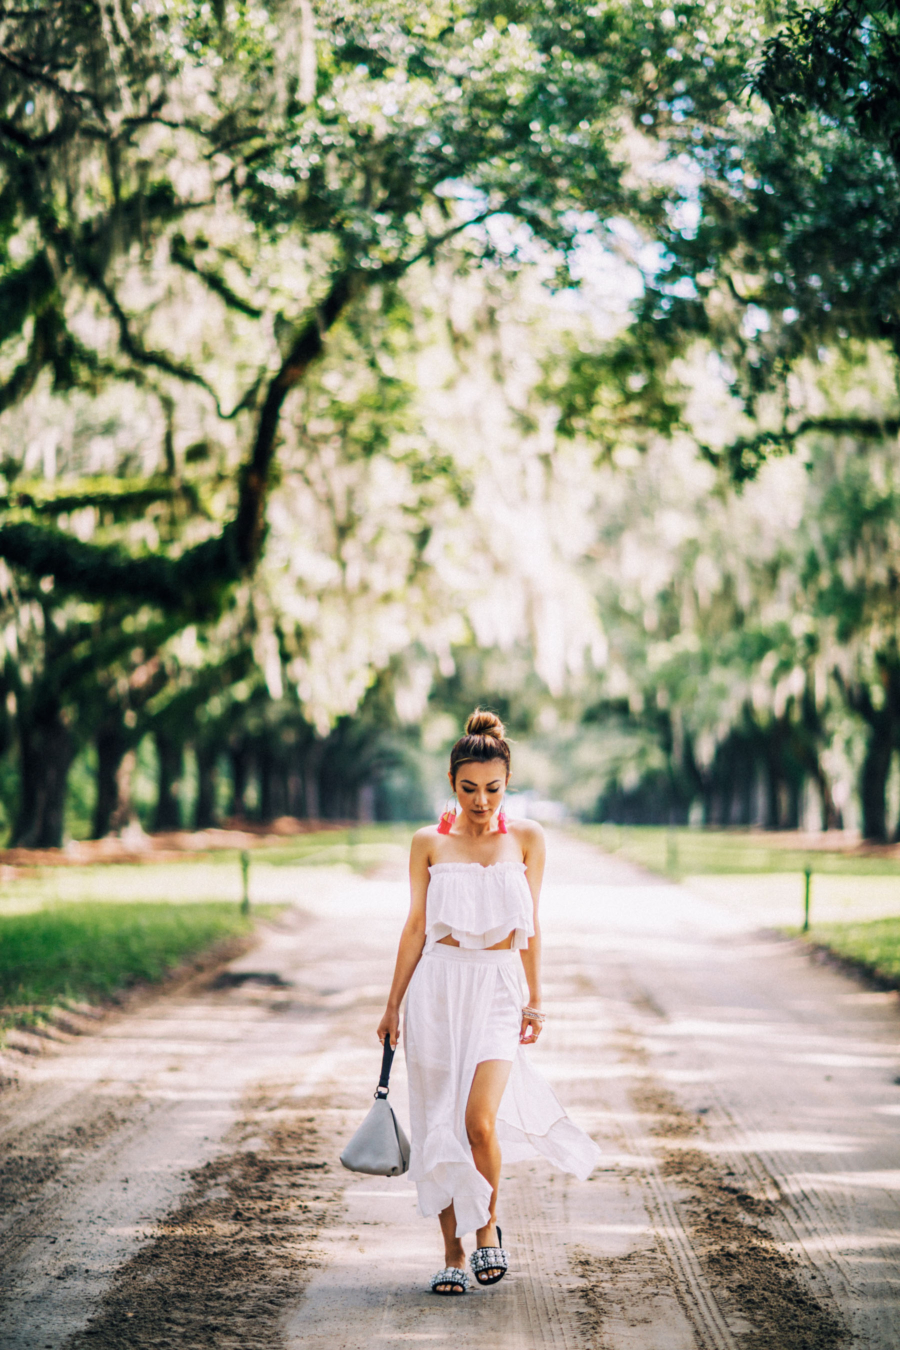 All White in Boone's Plantation - Travel Guide: 36 hours in Charleston, SC // NotJessFashion.com